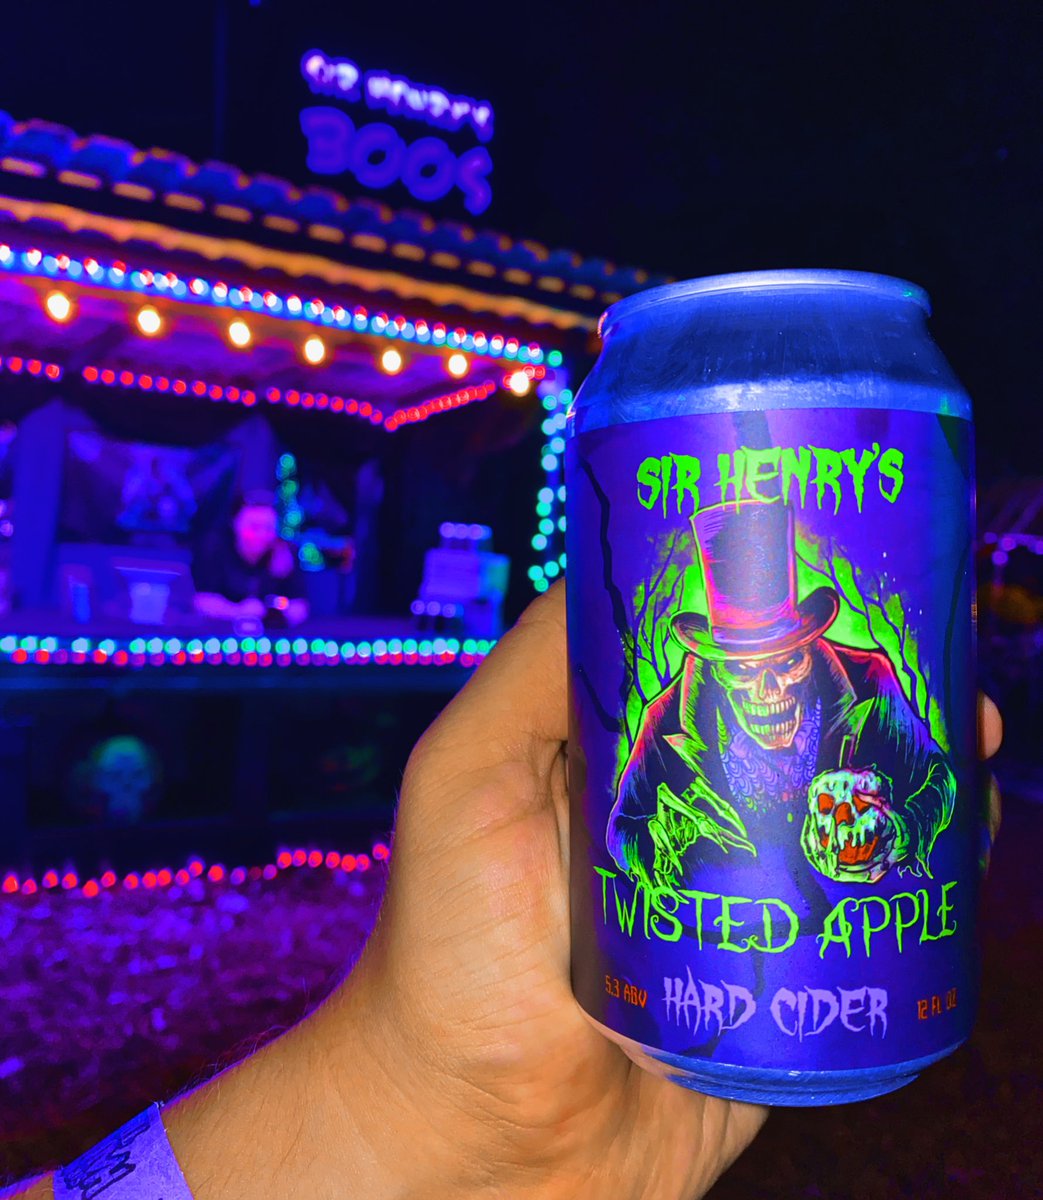 Sir Henry’s Brings A New Twist, To An Apple A Day… With His Twisted Apple Hard Cider Baby!!! 🍎💀🎩
.
#HardCider #SirHenrysTwistedApple #TwistedApple #Spooky #Halloween
#AppleCider #SirHenrysHauntedTrail #KeelFarmsAgrarian #HauntedTrail #HauntedHouse #SirHenrys 💀🎩